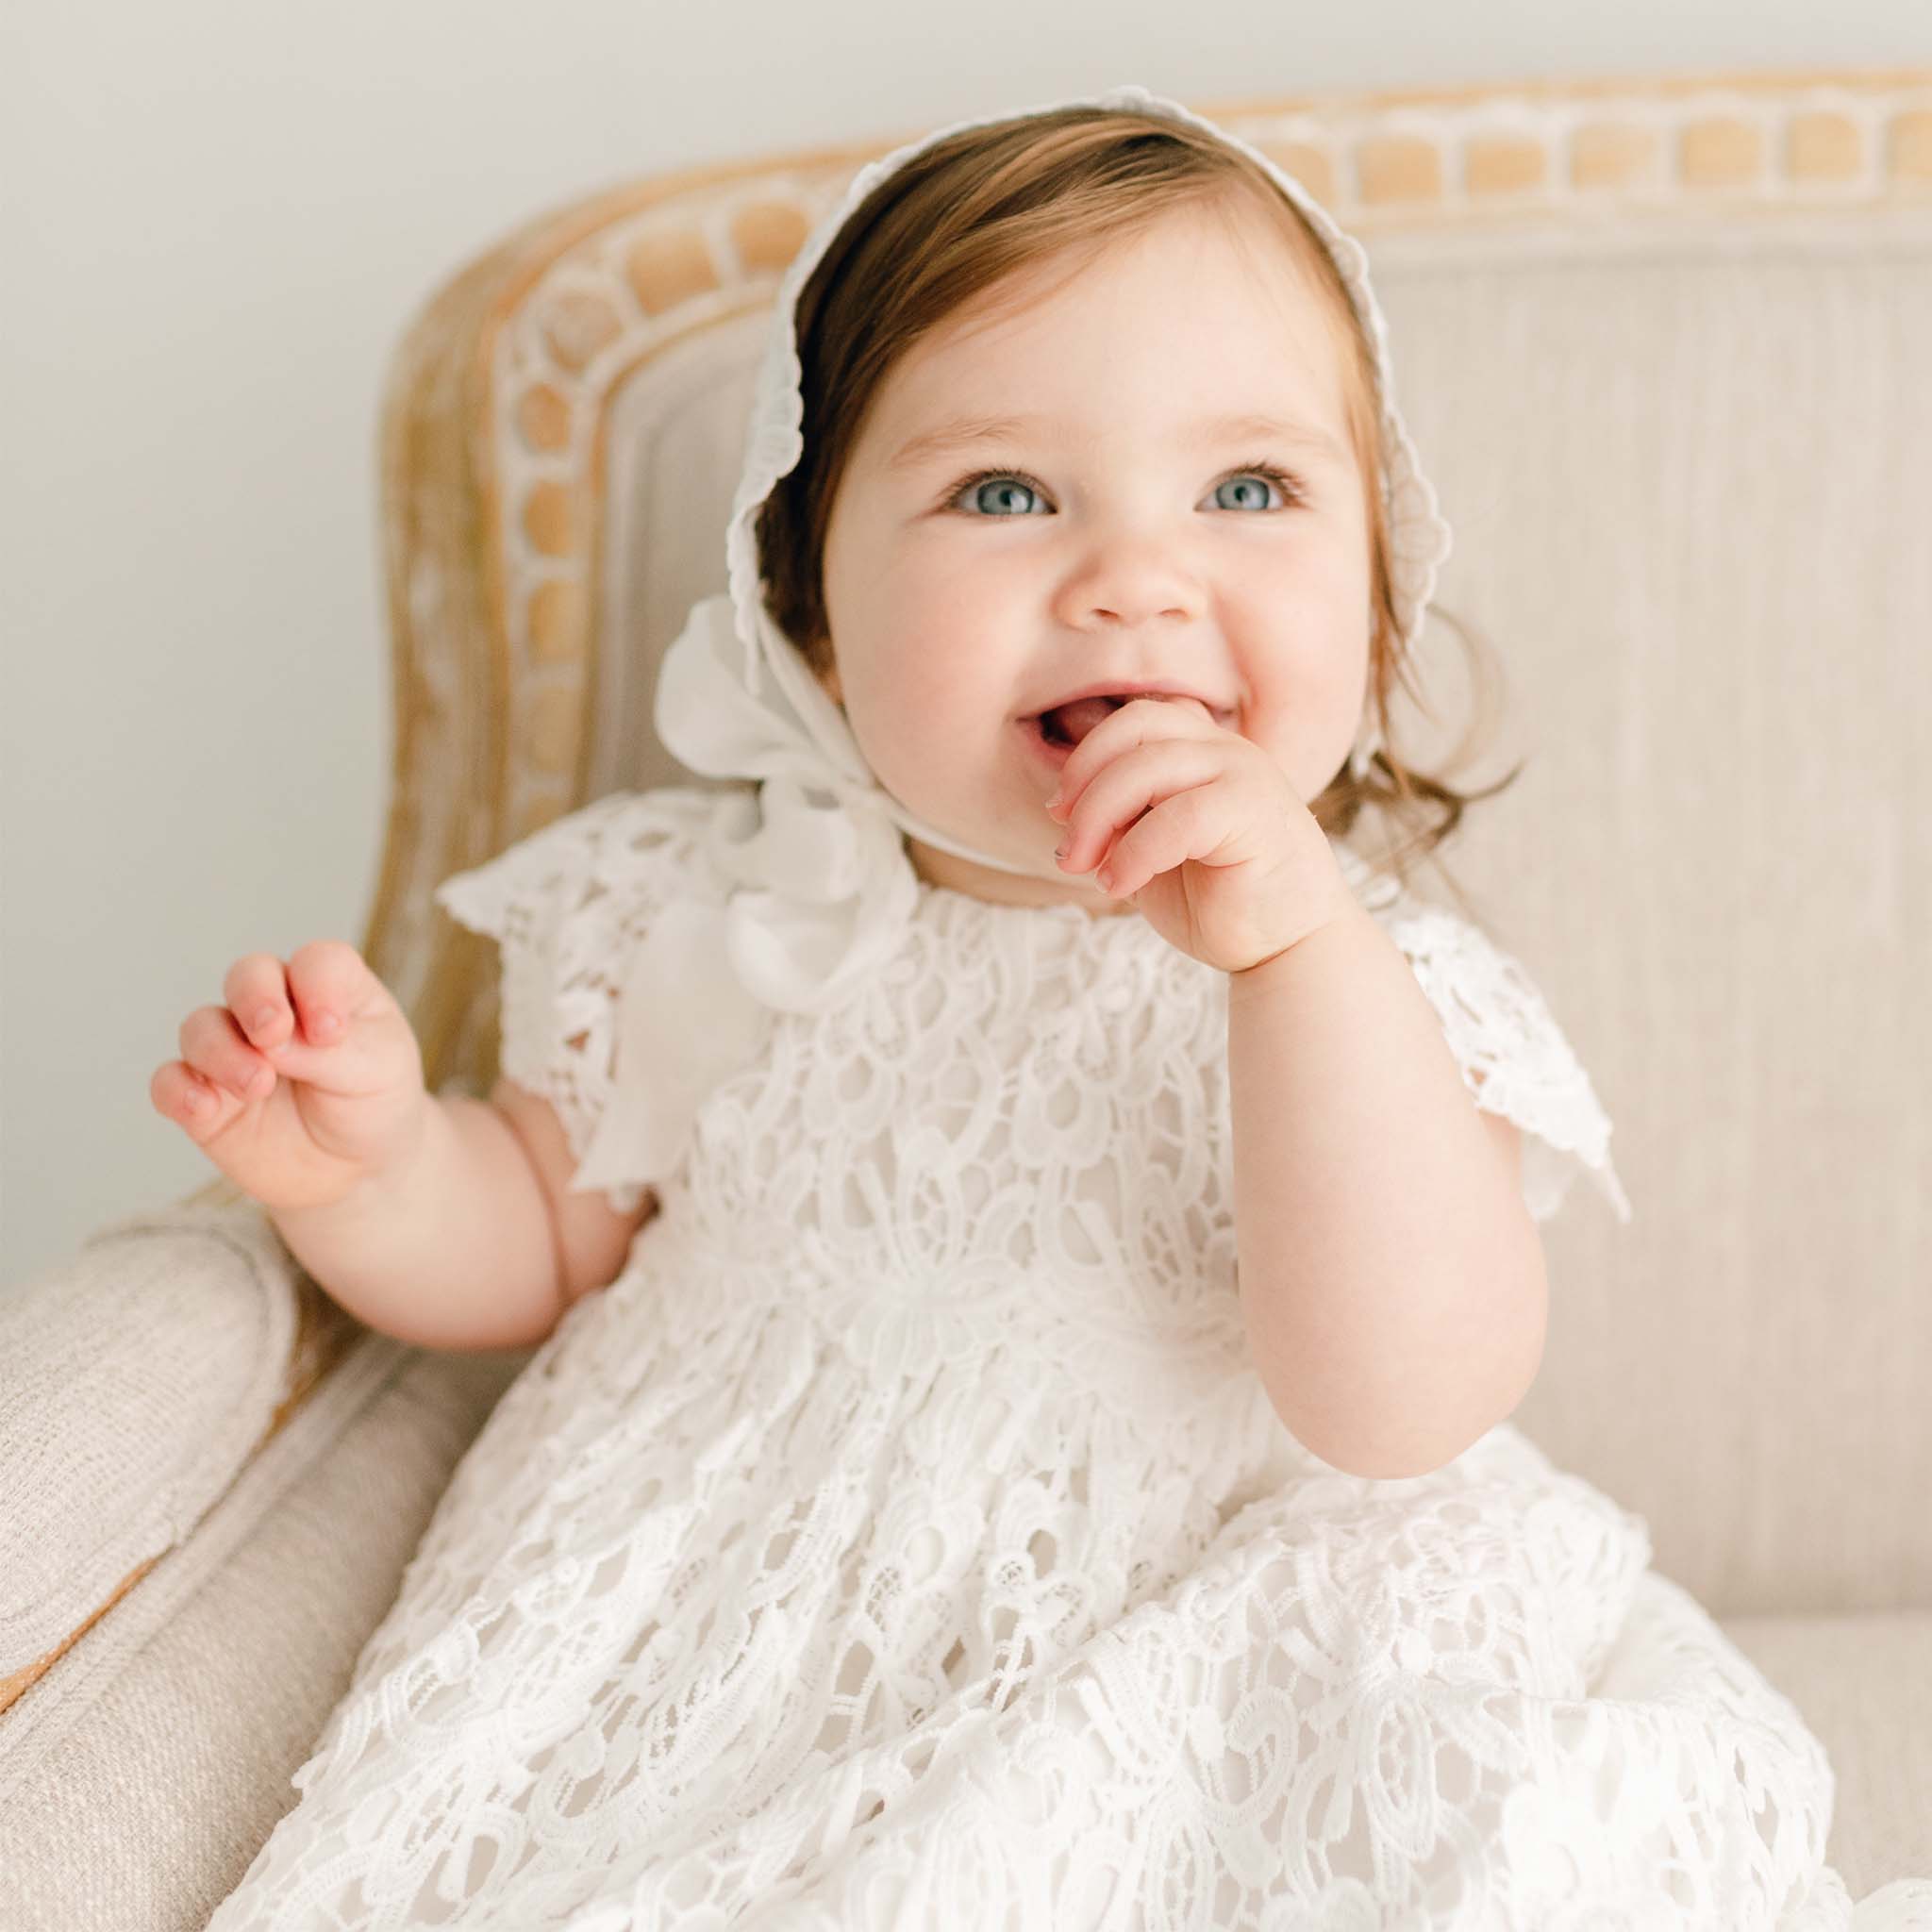 Baby Baptism Outfit: Who Should Buy It? – Carriage Boutique